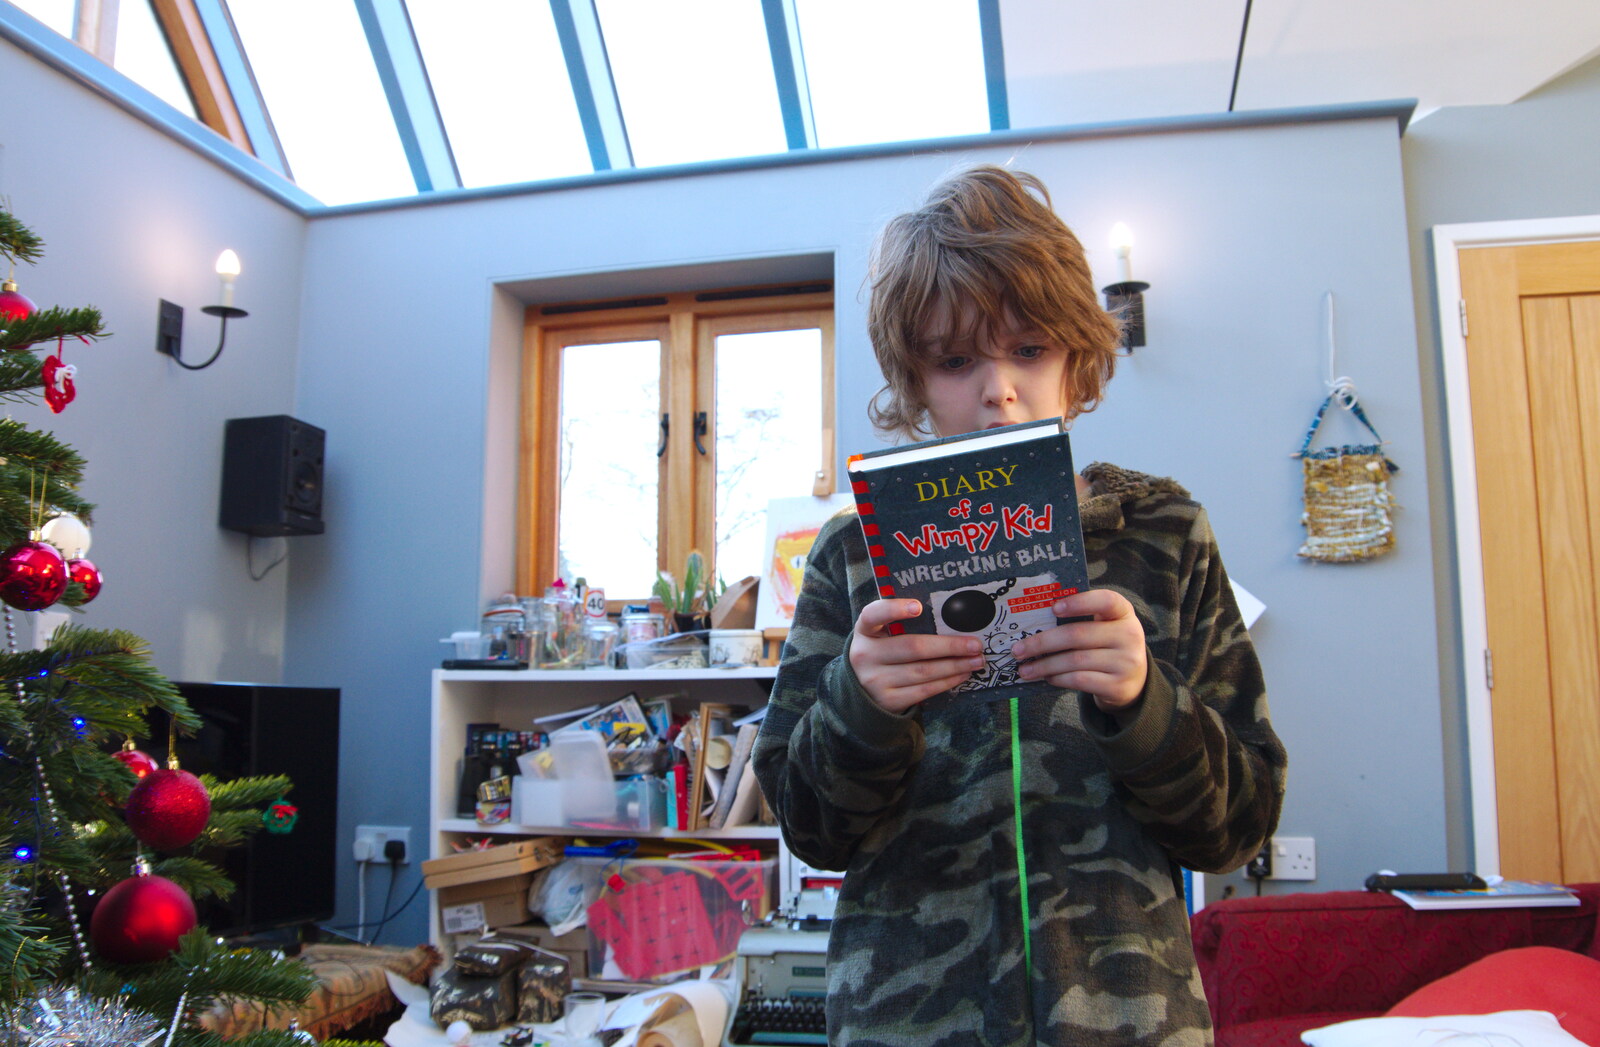 Fred's also got the latest Wimpy Kid book from Christmas Day, Brome, Suffolk - 25th December 2019